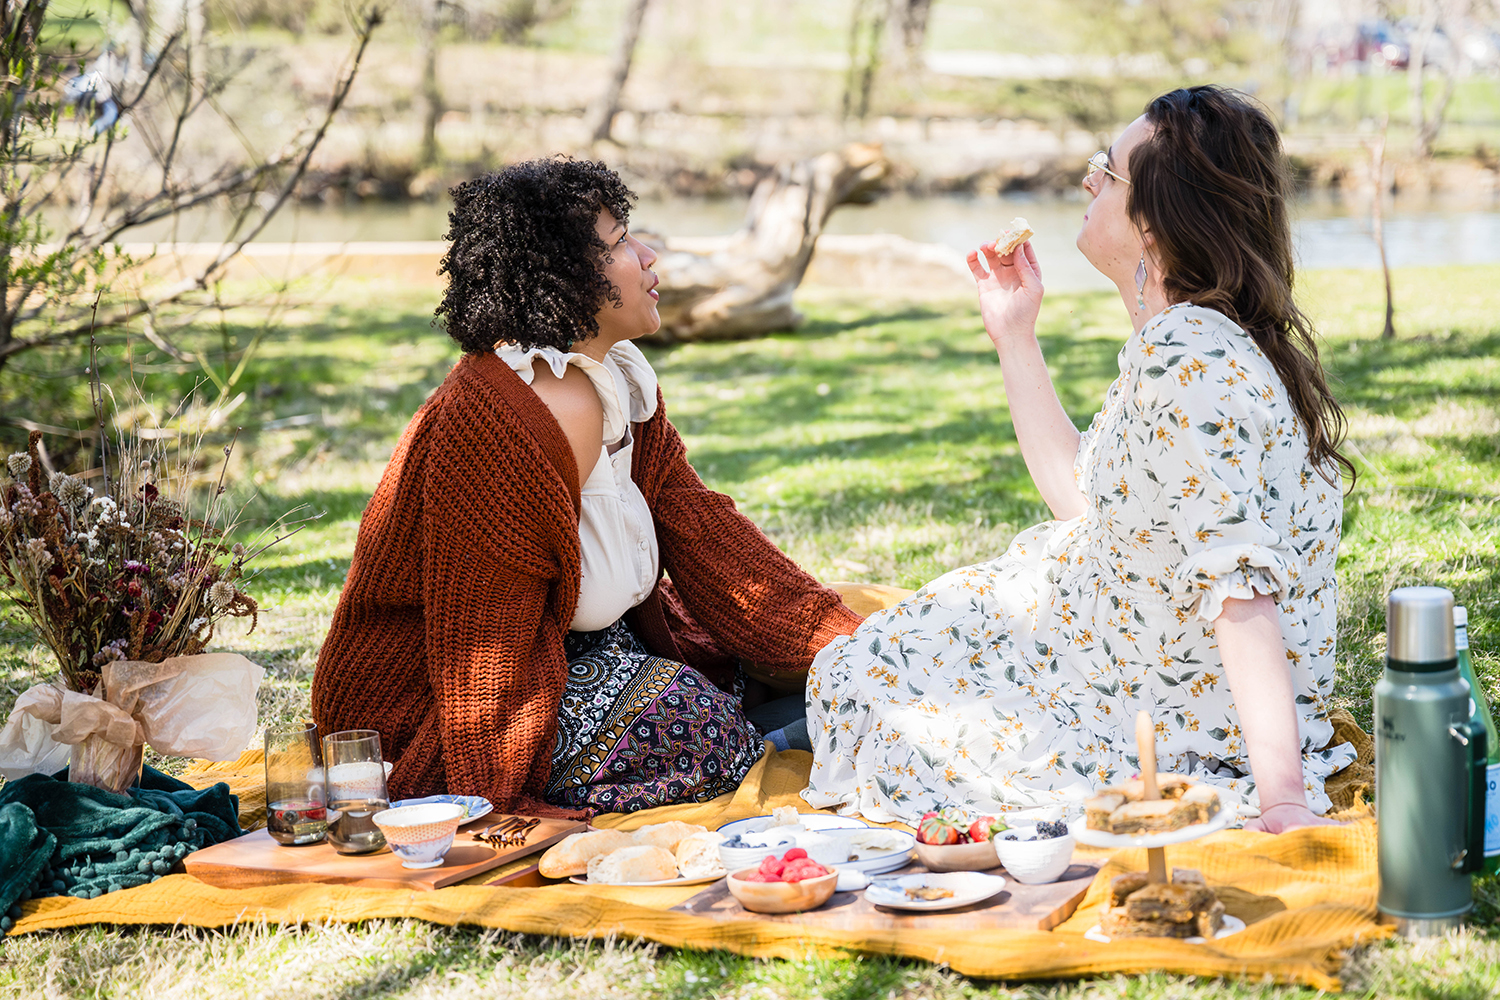 A queer couple have a picnic at Duck Pond and look up towards the trees as they talk and eat.